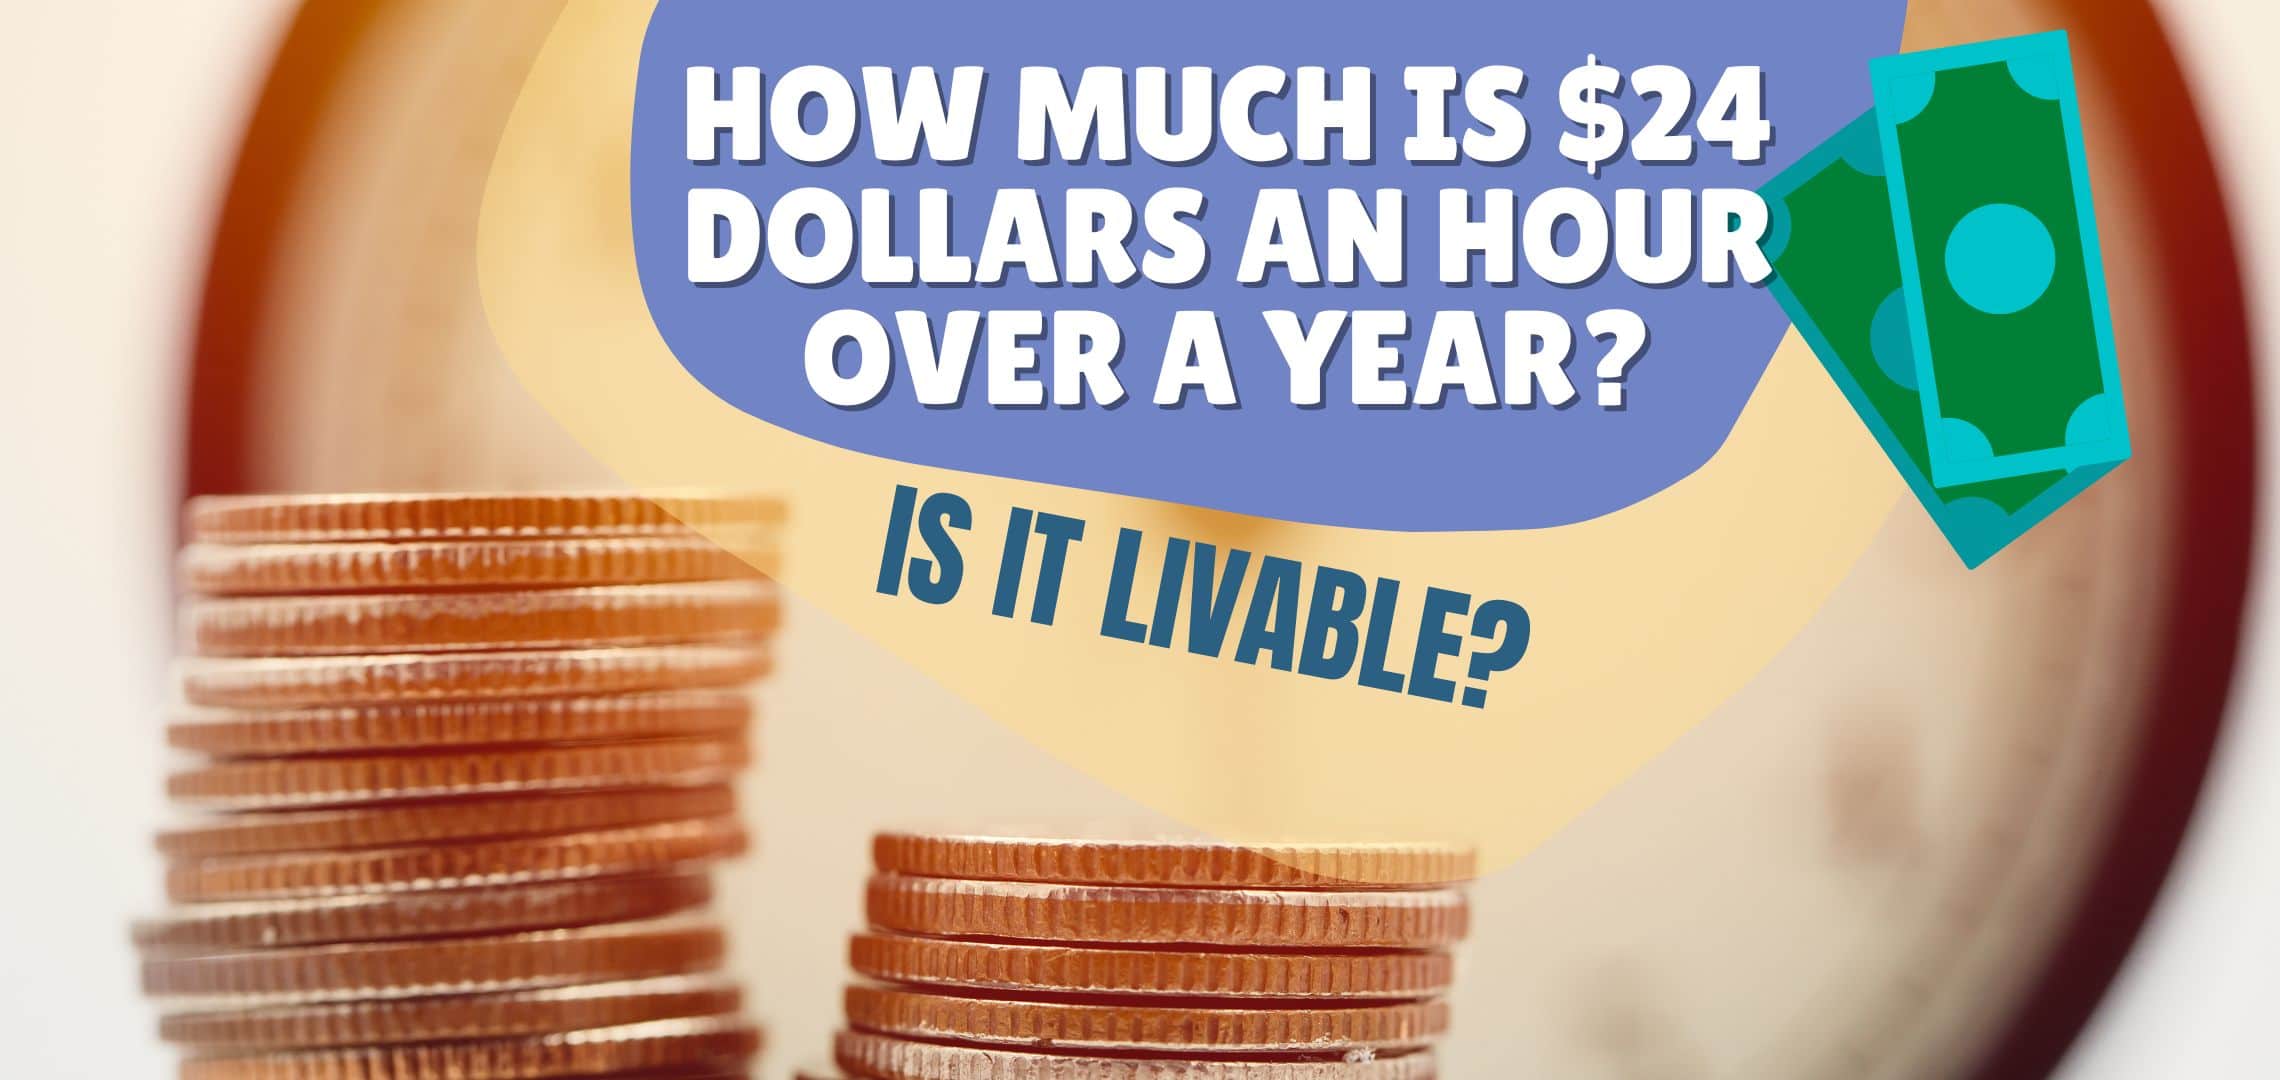 How Much Is $24 Dollars An Hour Over A Year? Is It Livable?